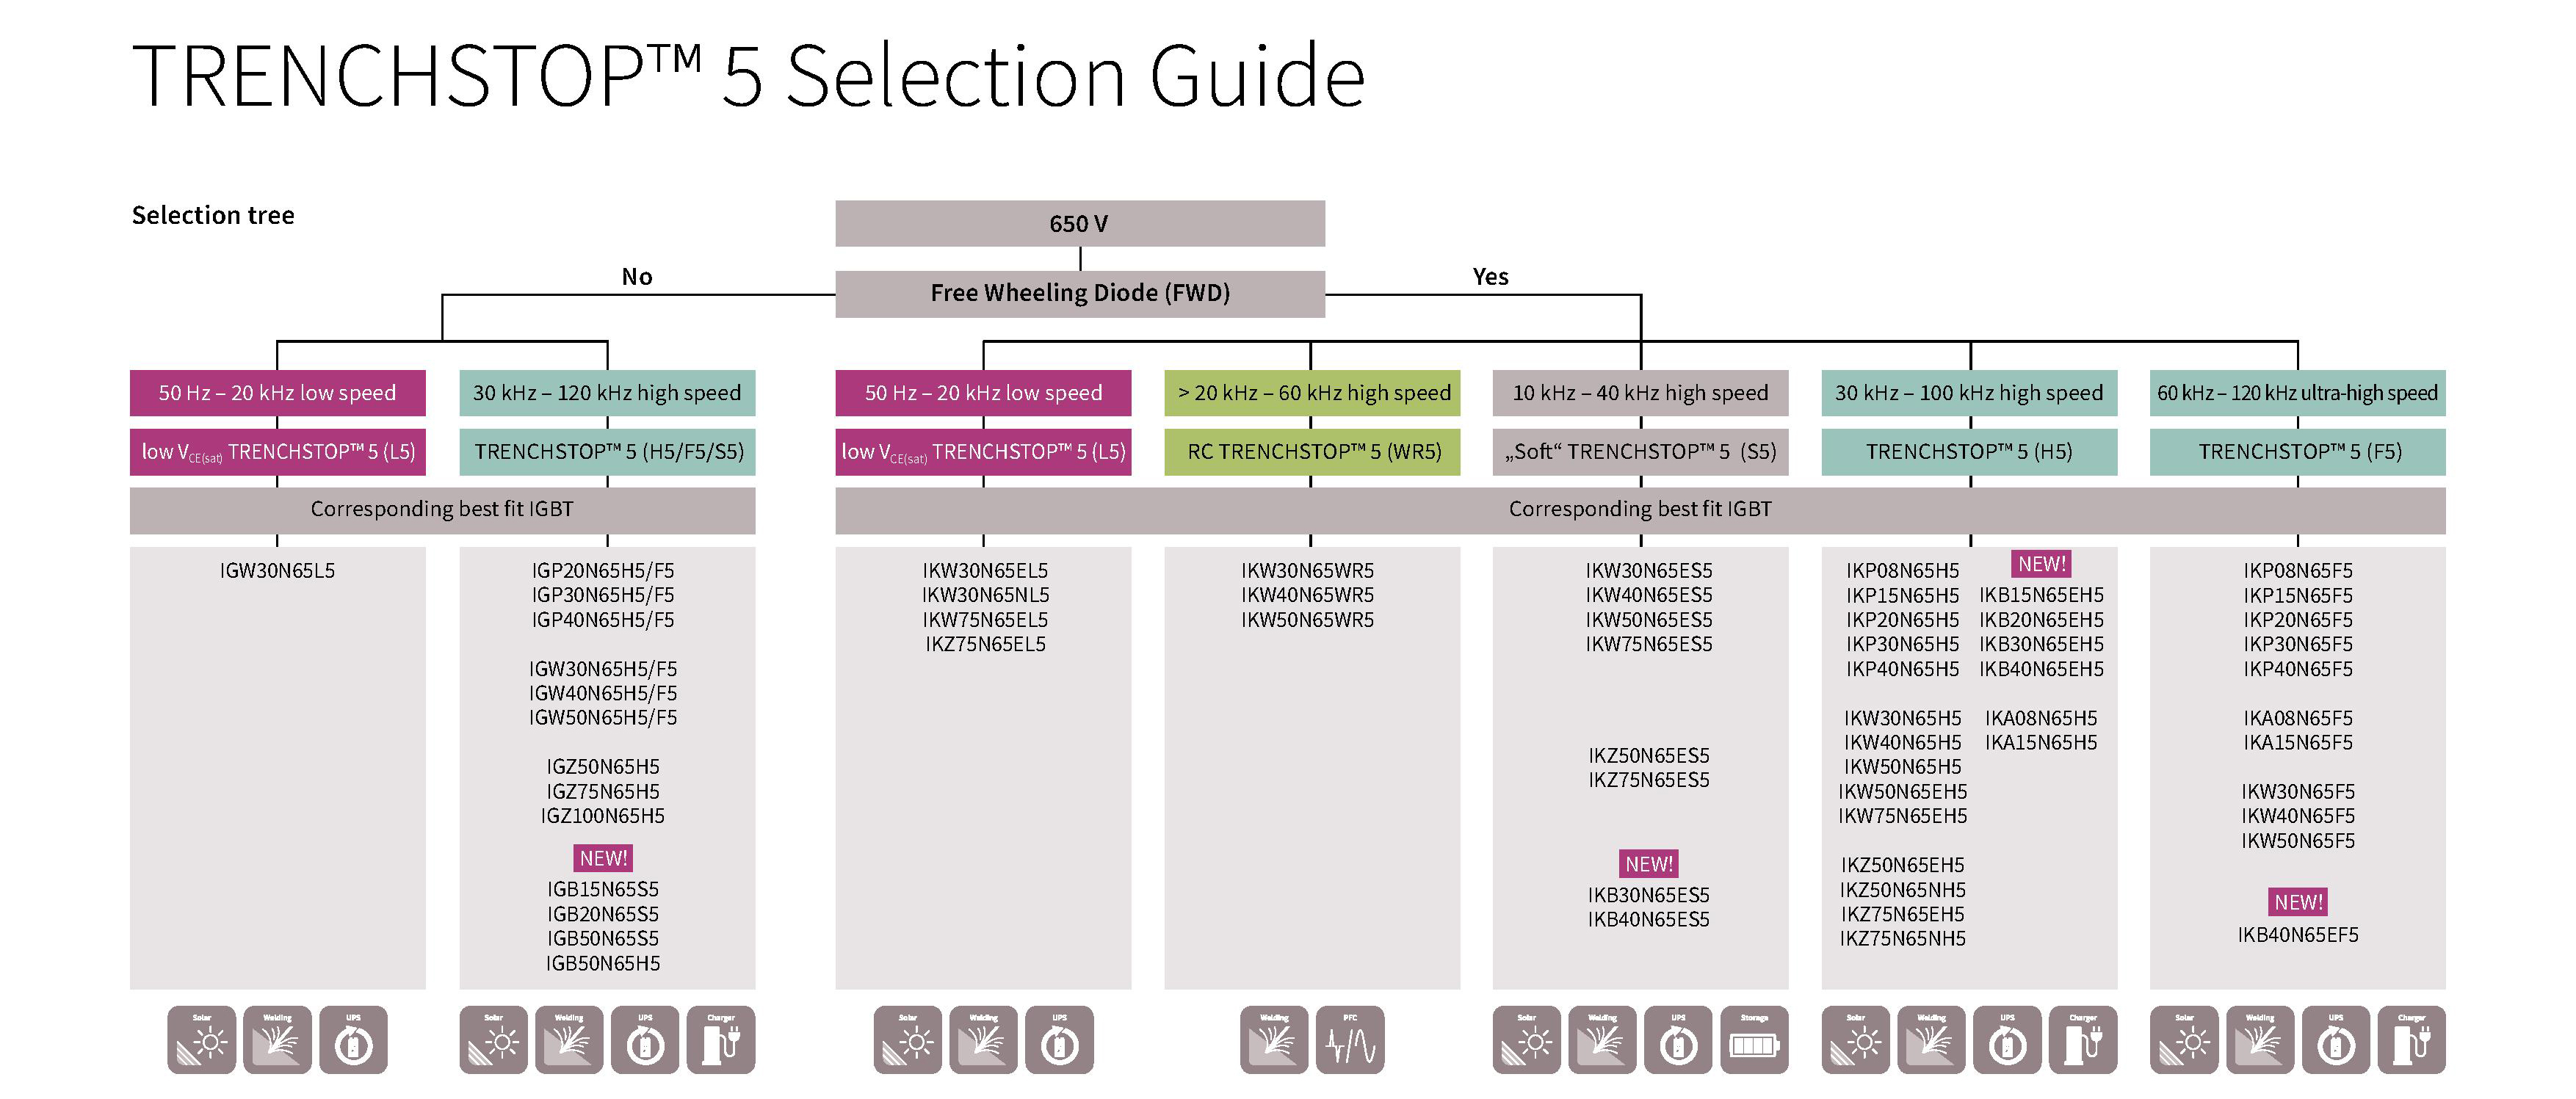 650 V TRENCHSTOP™ 5 Family Selection Tree - Selection guide